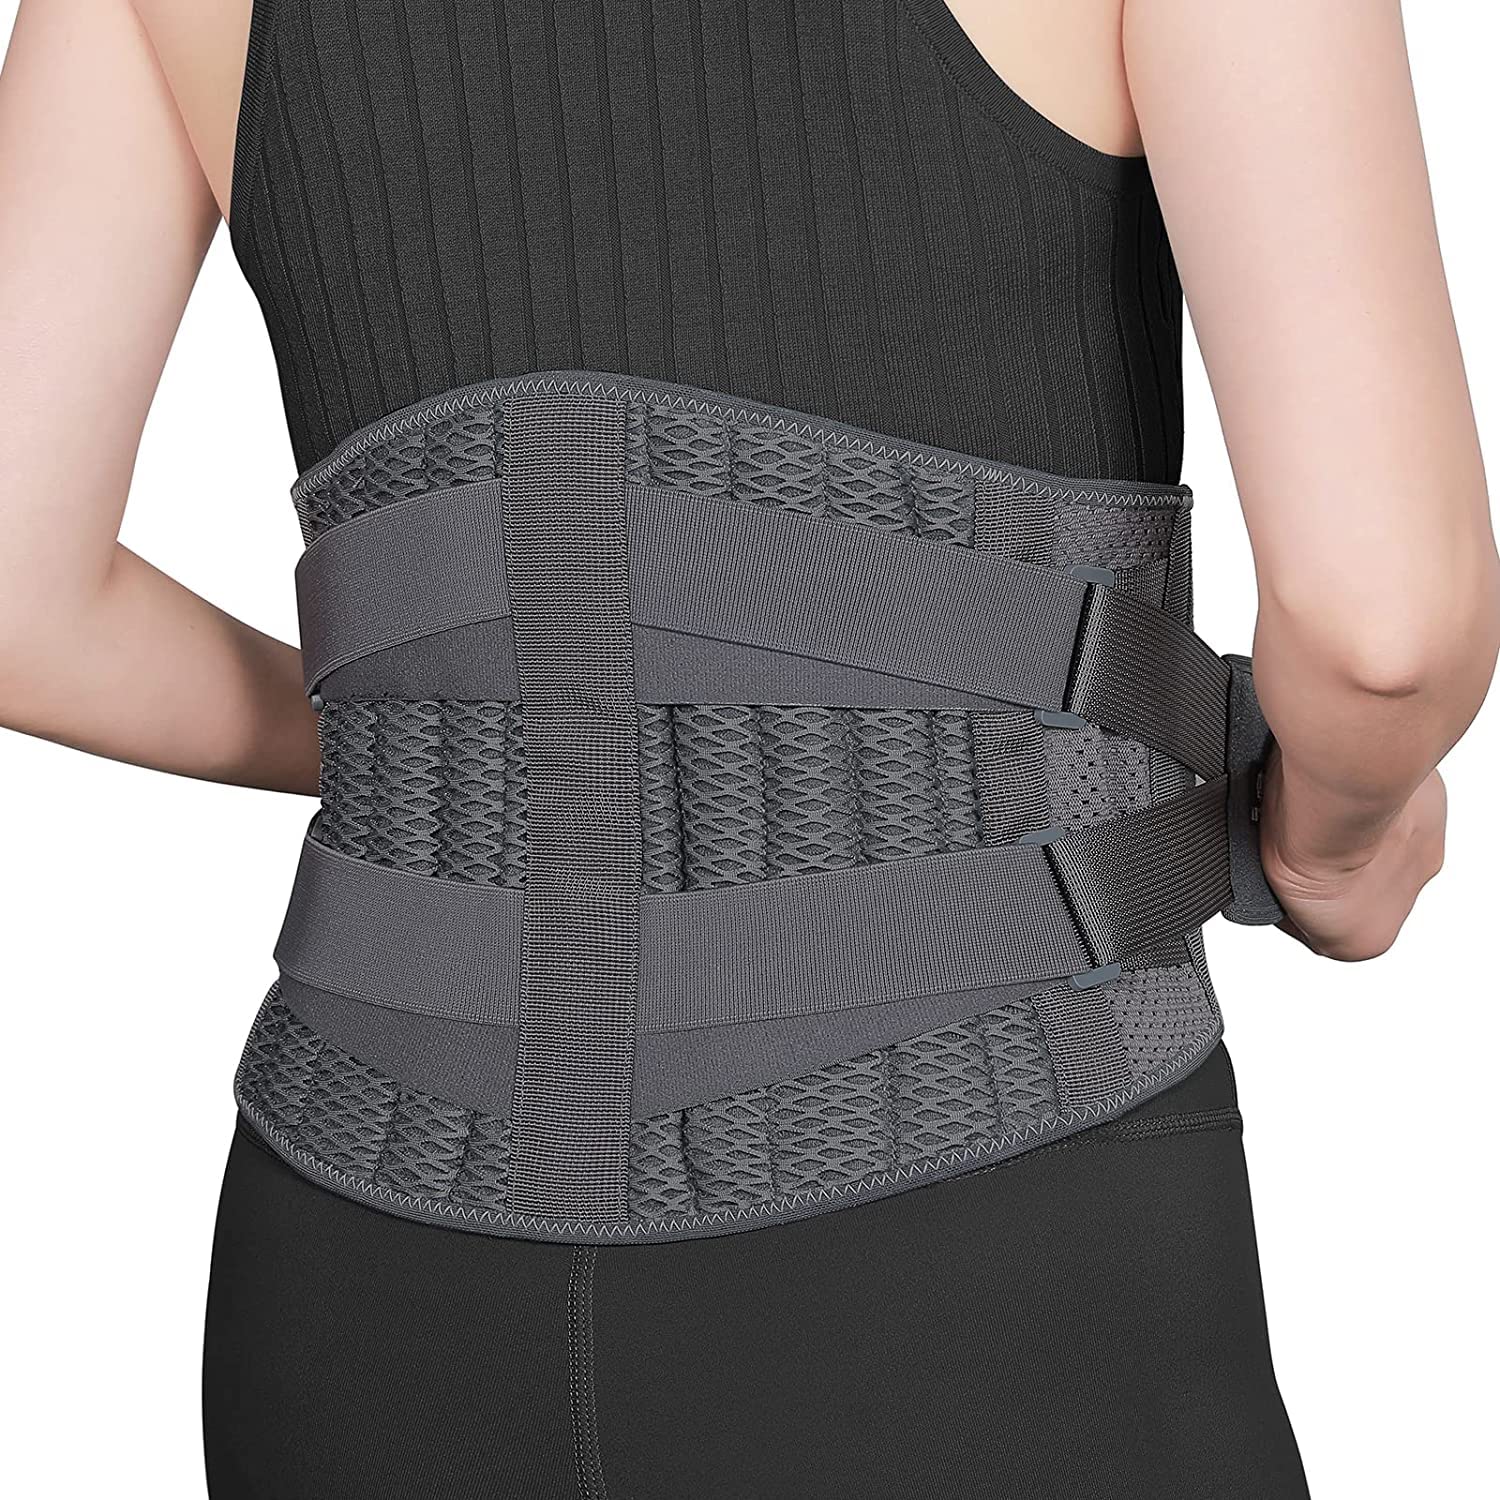 Lower Back Brace Lumbar Support - Adjustable Air Mesh Back Brace with 5  Stays for Lower Back Pain Relief, Herniated Disc, Sciatica, Scoliosis,  Lower